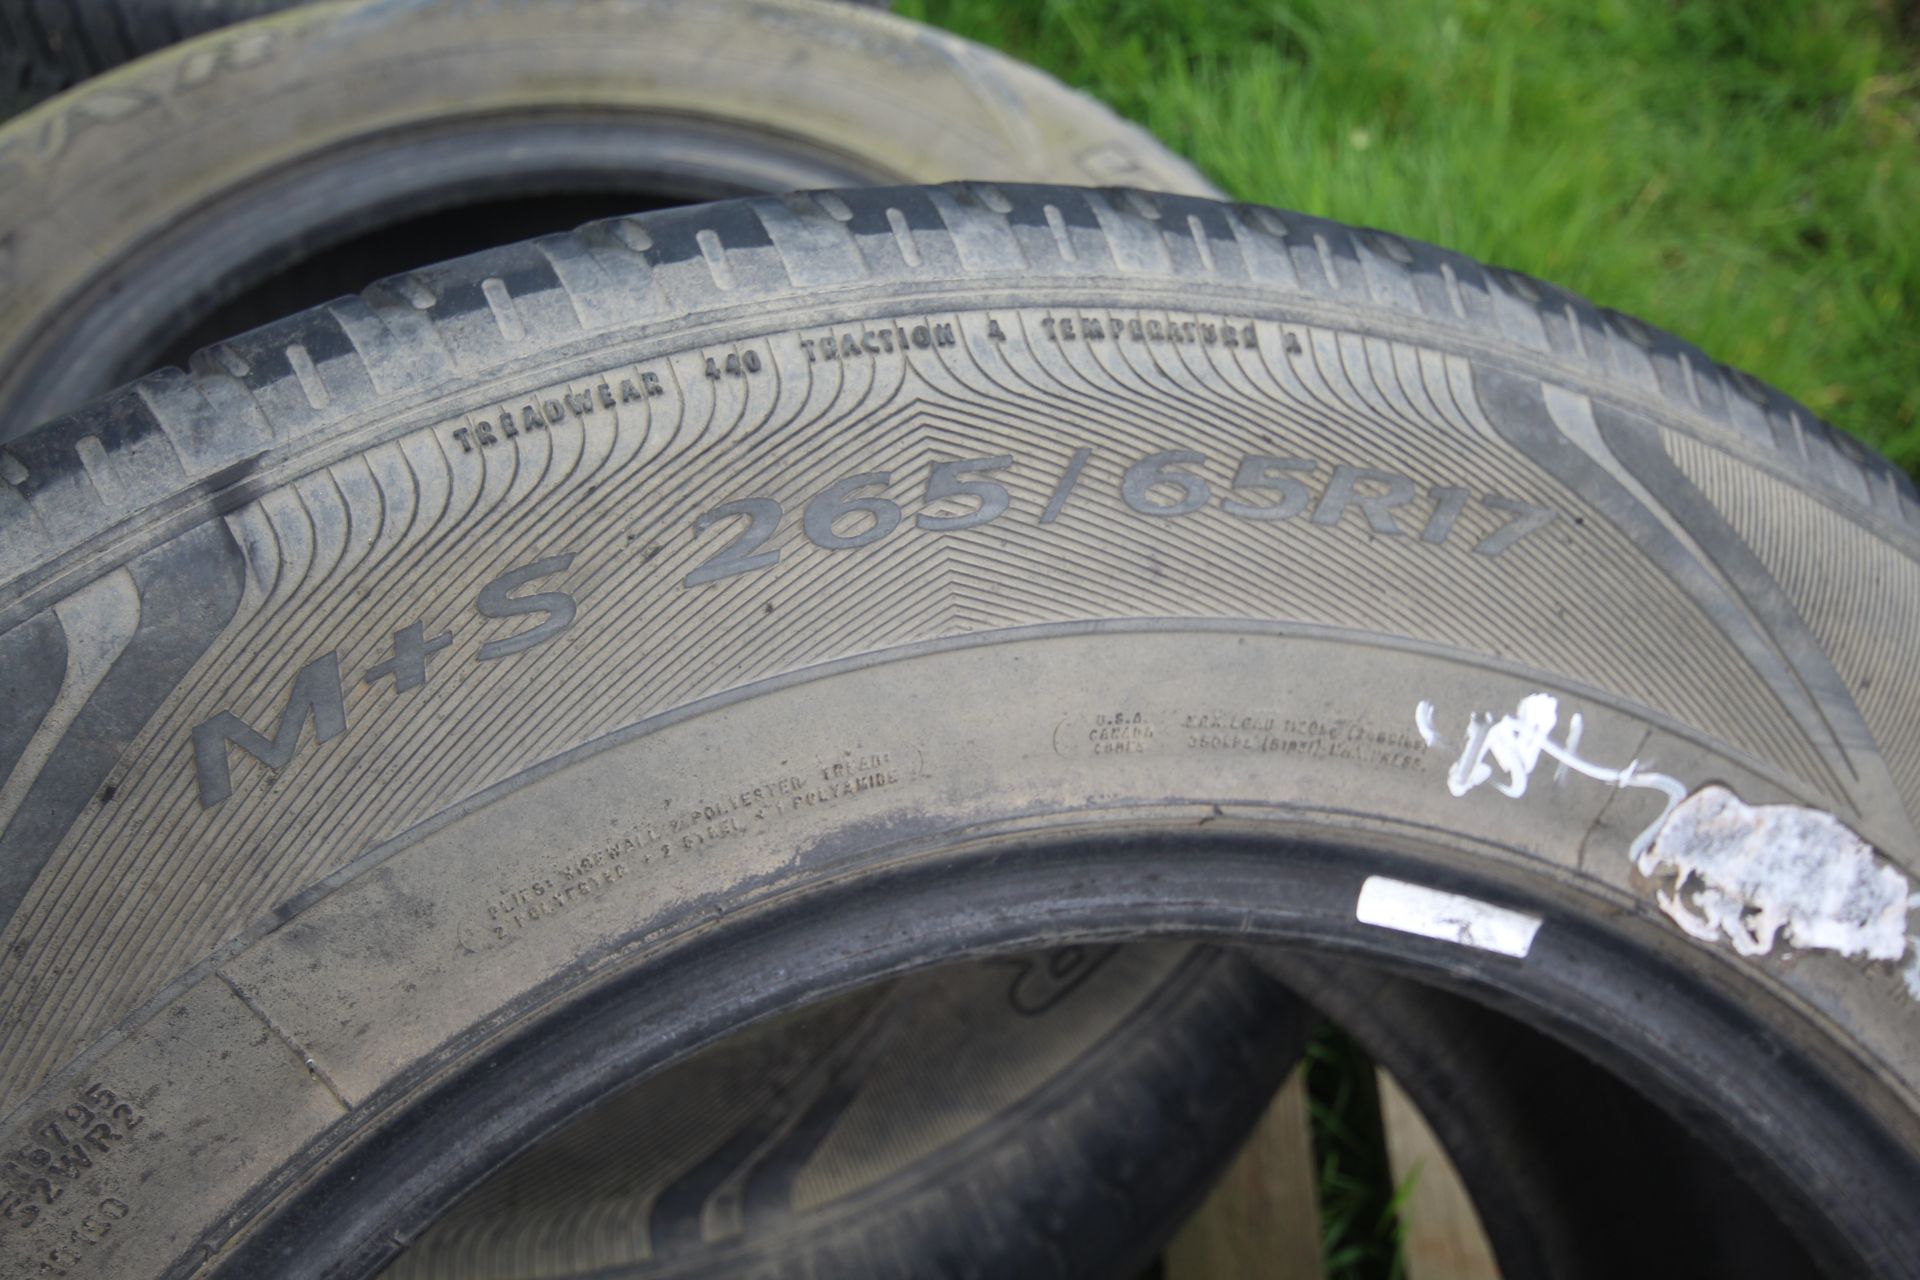 2x 265/65R17 Ford Ranger tyres. - Image 3 of 3